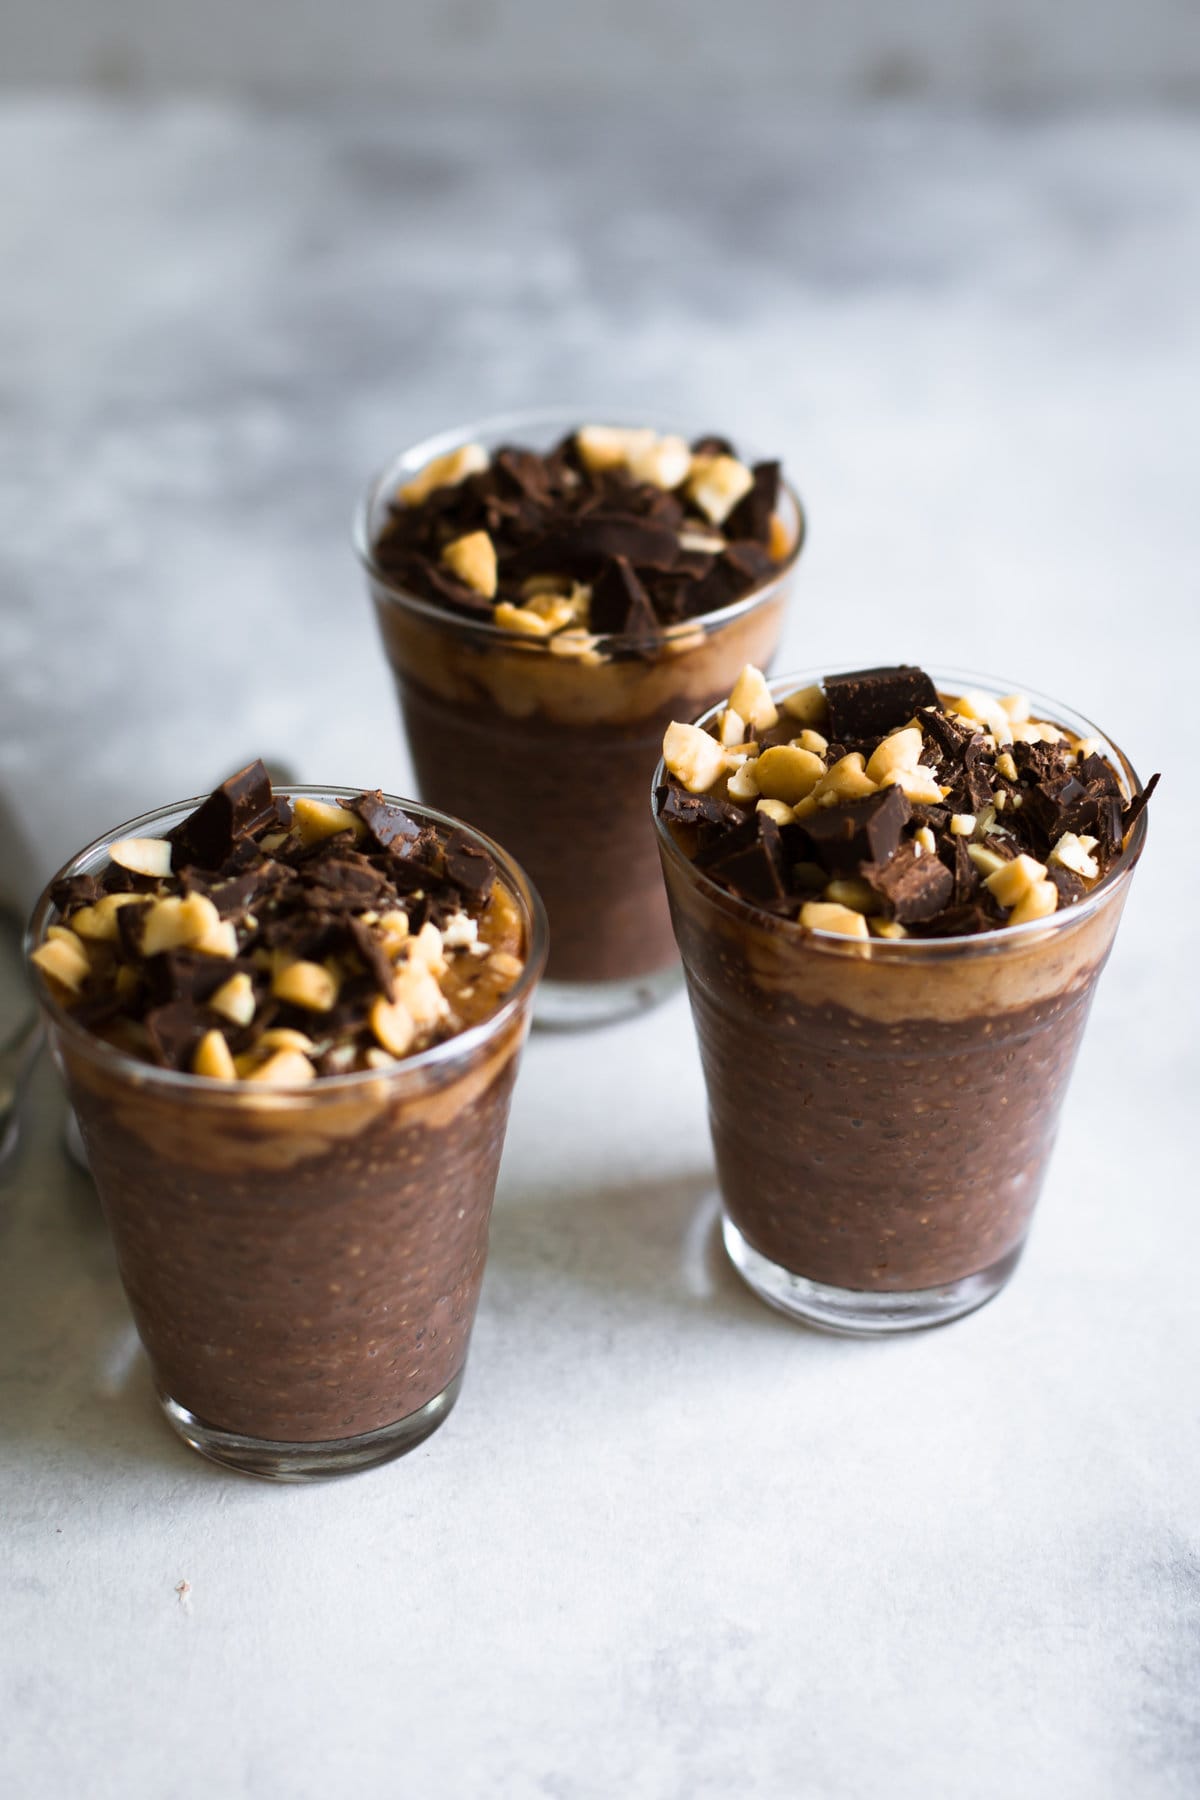 Vegan Snickers Chia Pudding - Chocolate Chia Seed Pudding topped with a Peanut Butter Date Caramel. Dairy Free/Gluten Free/Refined Sugar Free. #vegan #snickers #chiaseed #pudding #chocolate #date #caramel #peanutbutter